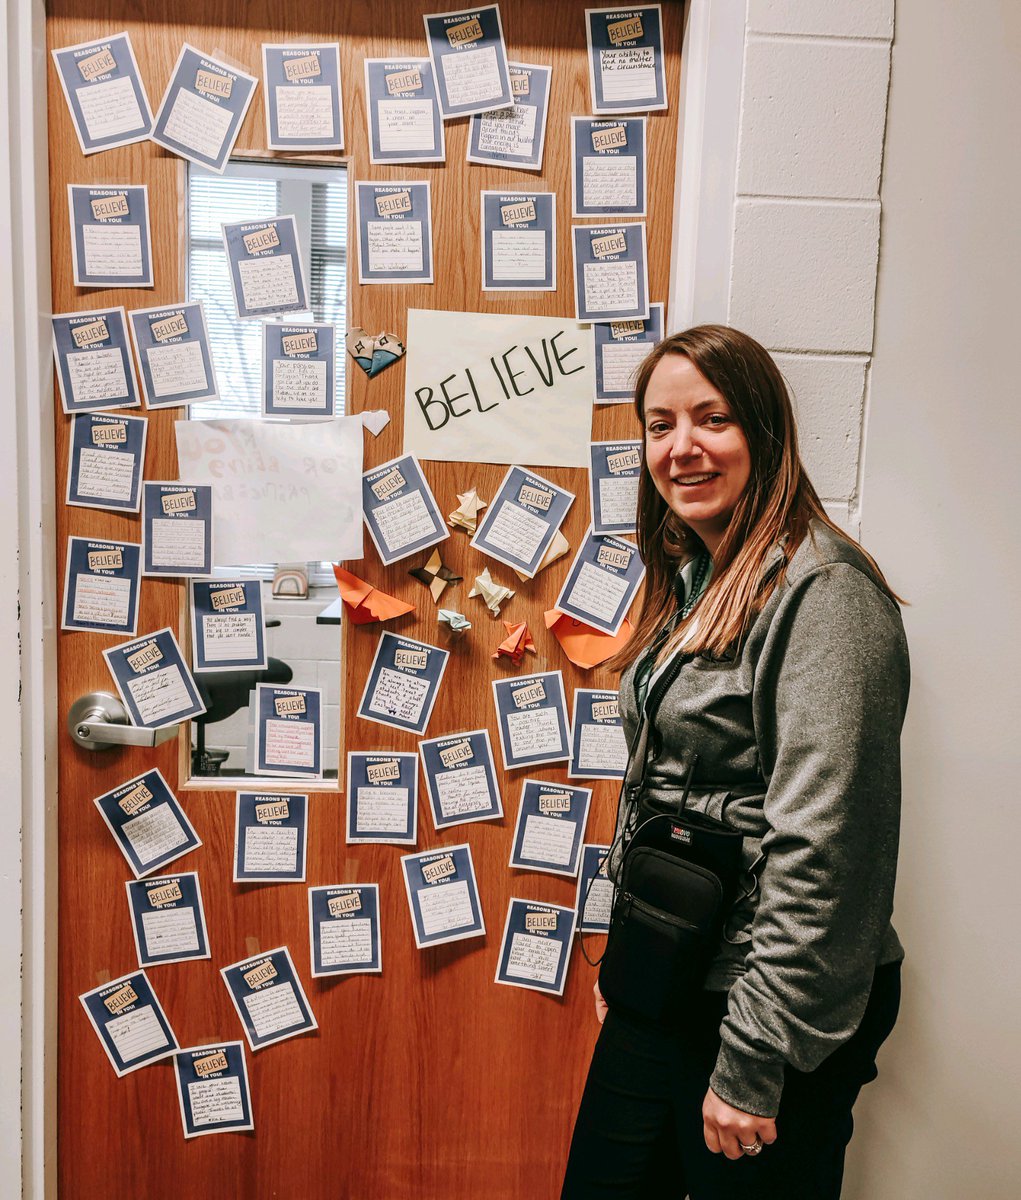 One last thing before spring break! In honor of the new Ted Lasso season and Dr. Nolin’s favorite show, Eastgate showered her with all the reasons we BELIEVE in her. She is truly one of the best! 🦅💙 @NKCSchools @Eastgate6NKC #Eaglesrise #TedLassoSeason3 @jessicalnolin